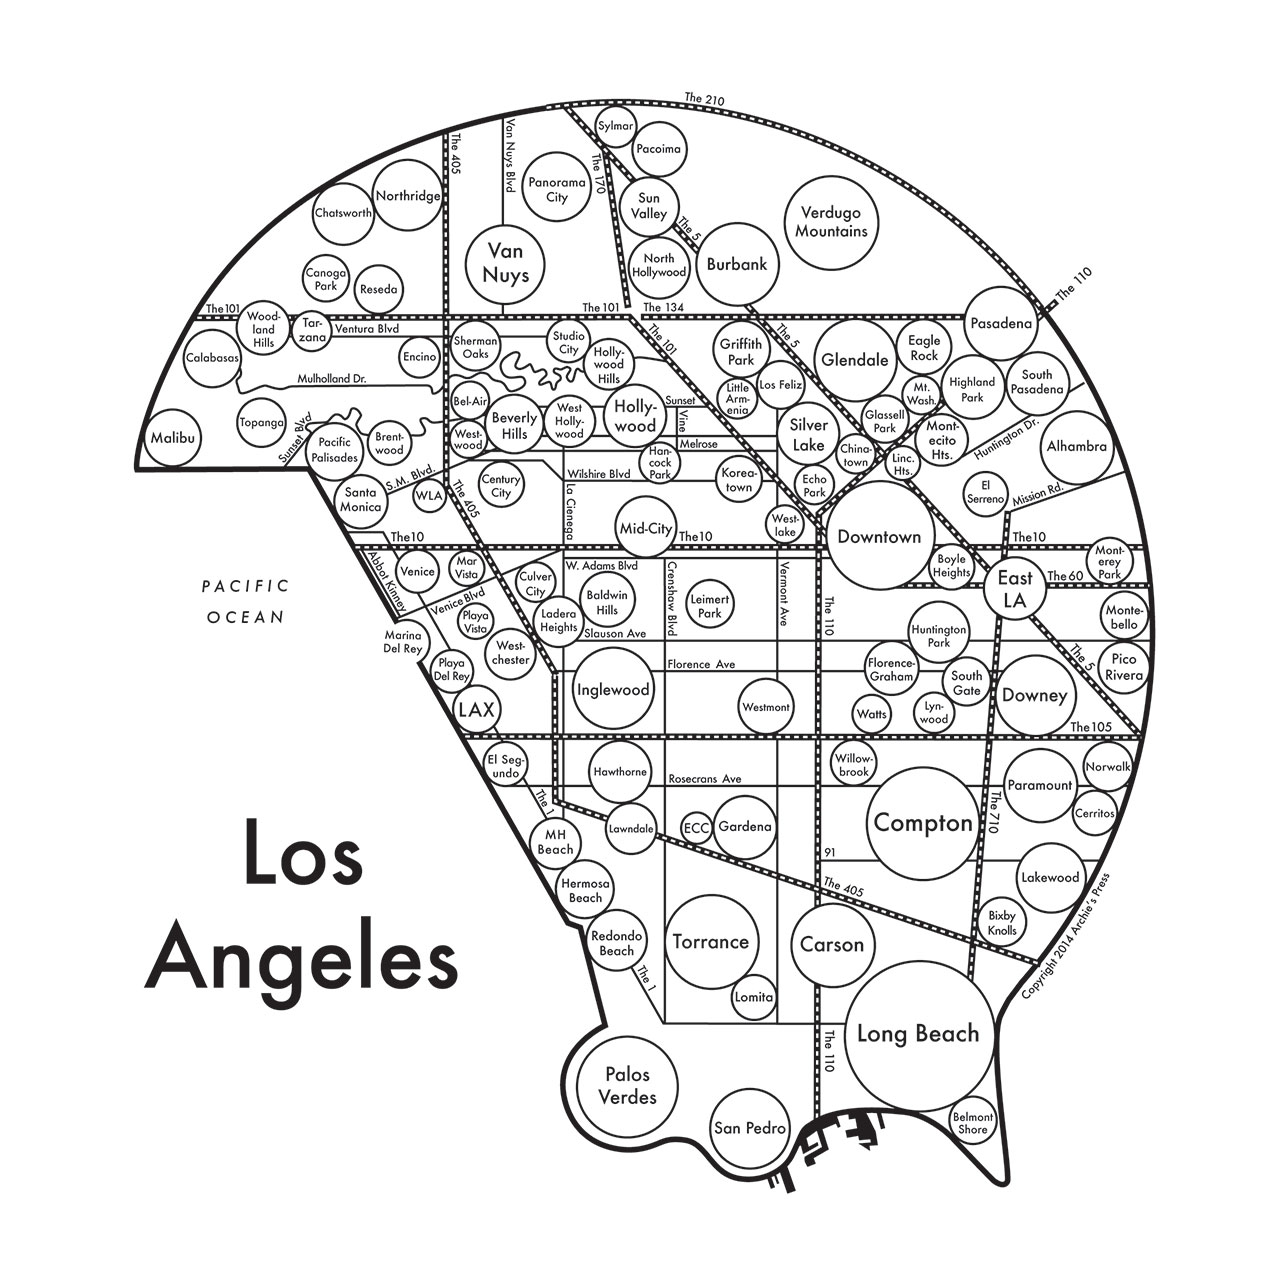 Archies Press - A Mental Map of… Los Angeles, 2013.
From 'Mind the Map', © Gestalten 2015.